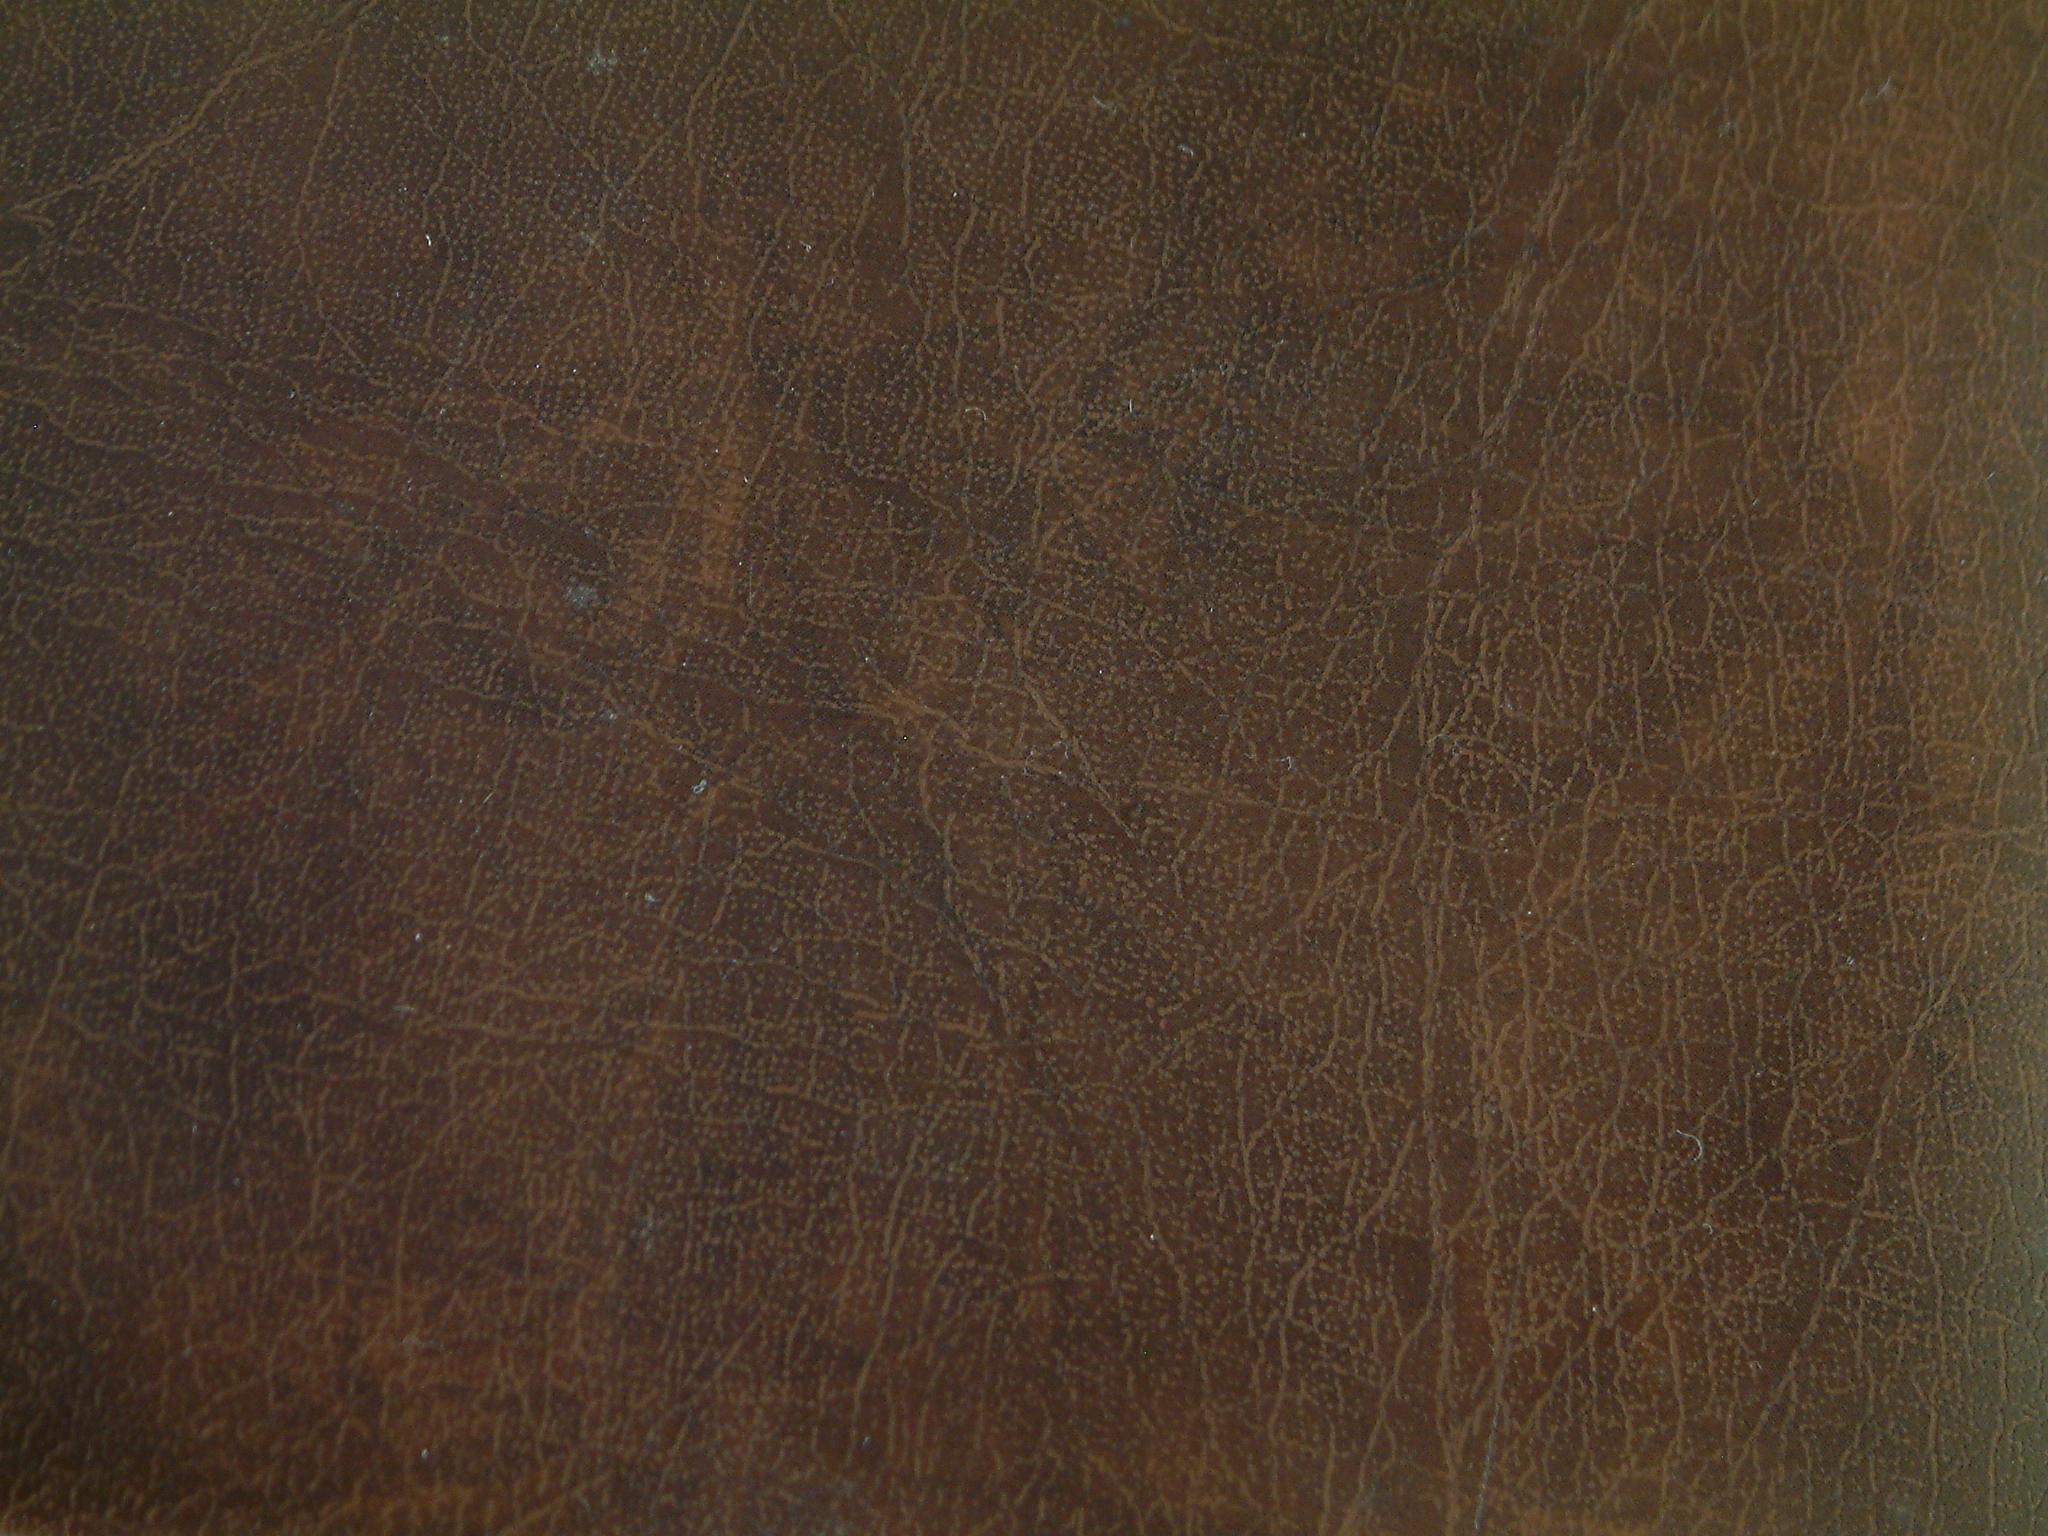 Leather Textures Wallpaper Texture